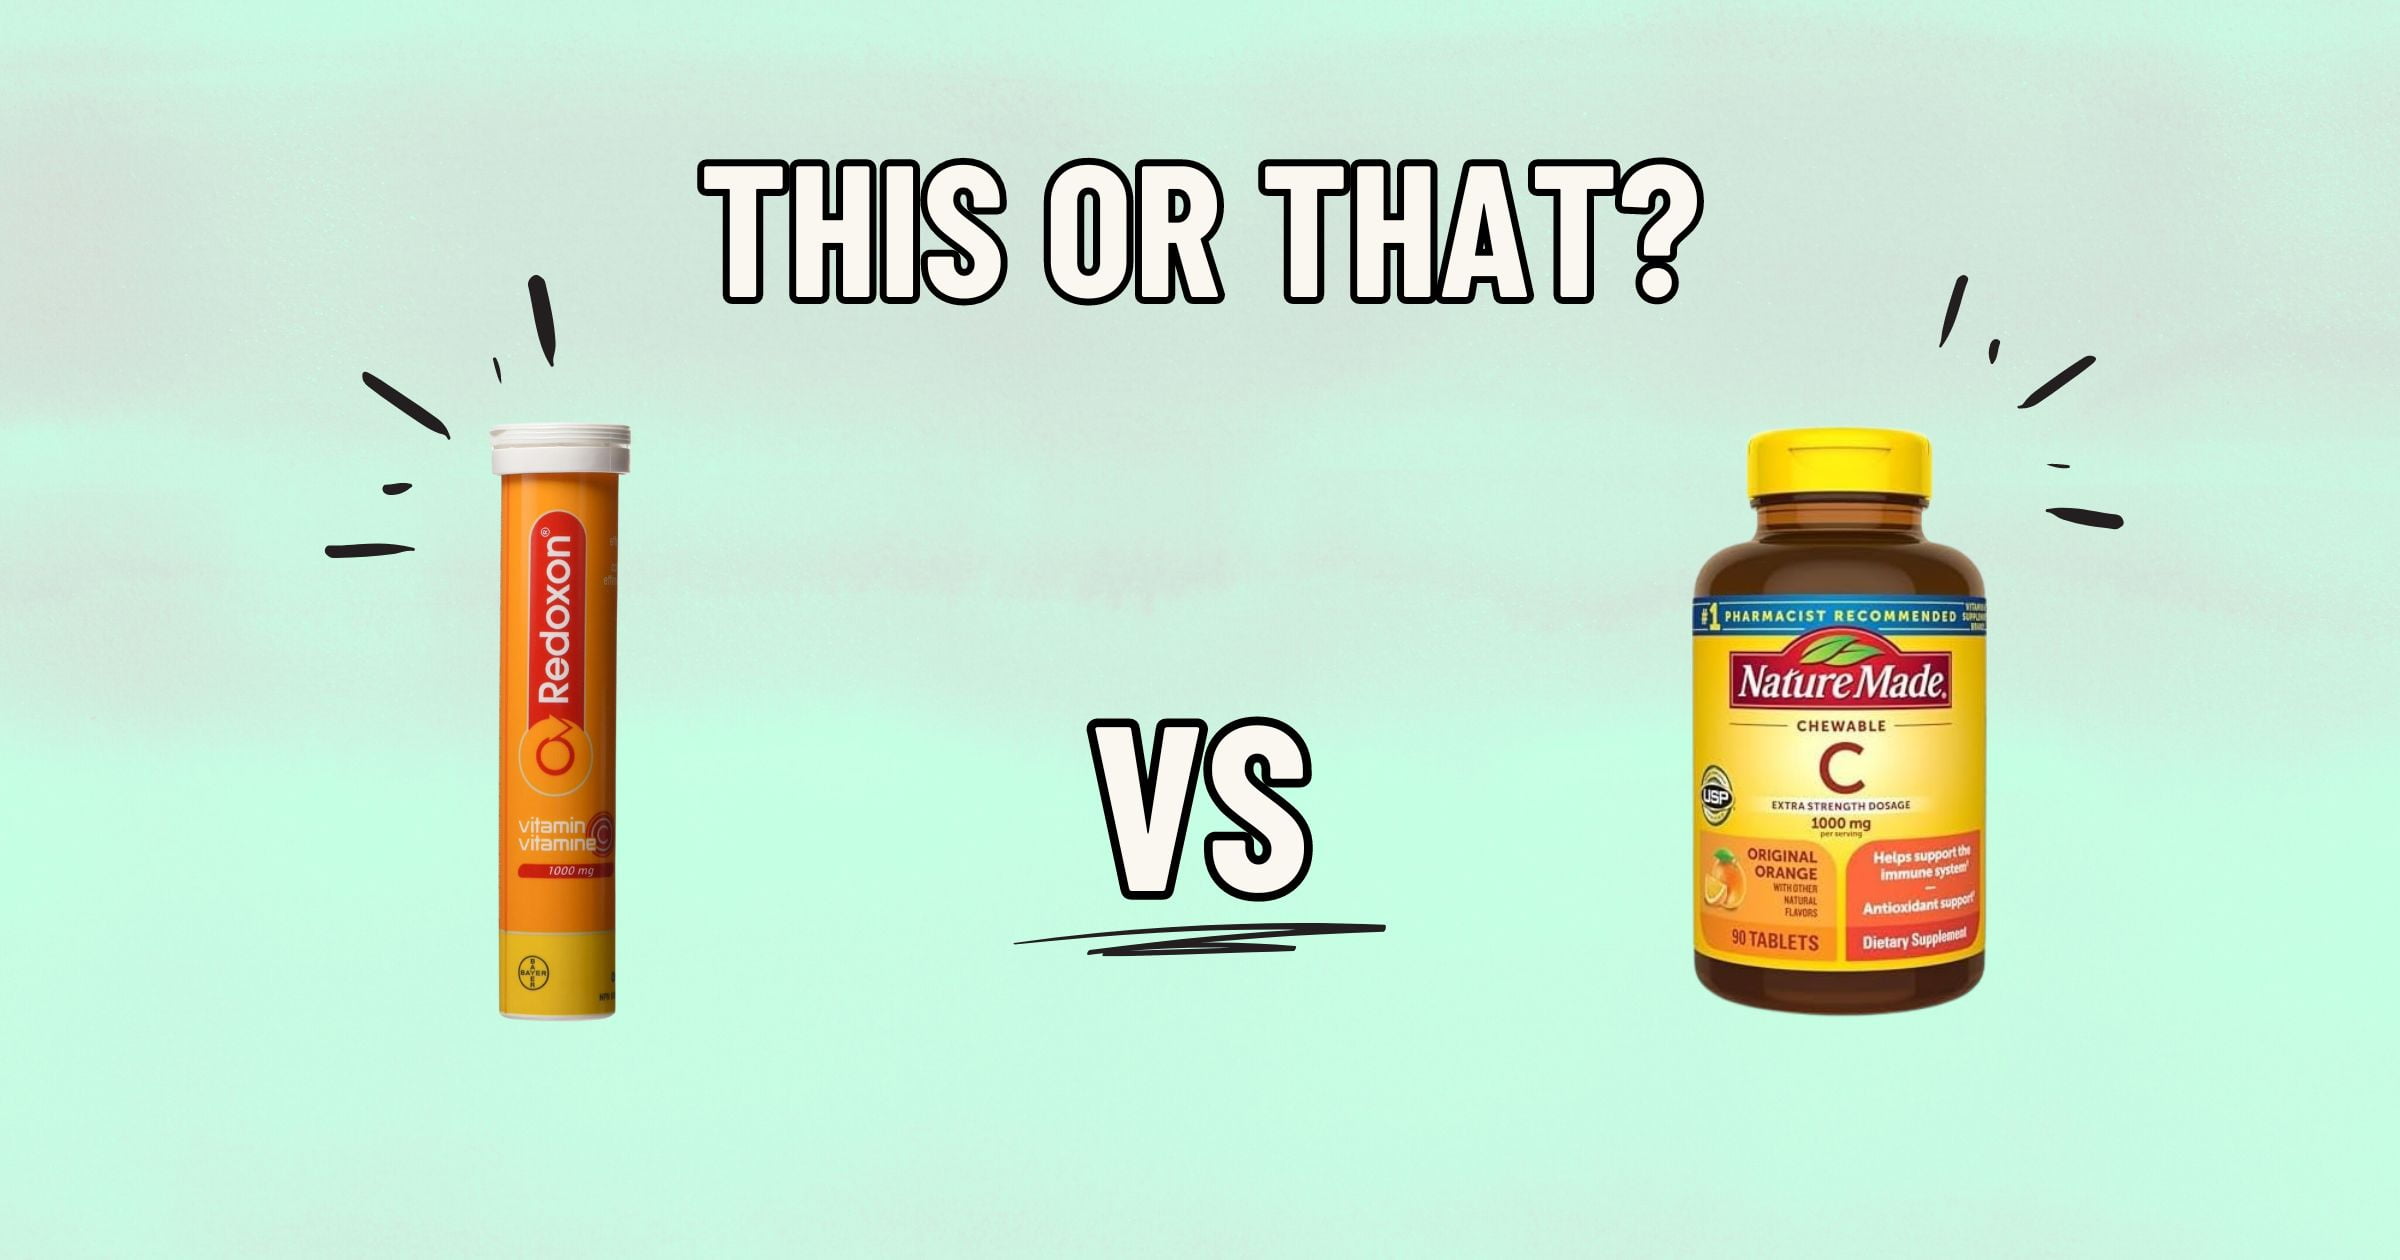 An image features a comparison of two Vitamin C supplements. On the left, there is a tube of Redoxon Vitamin C effervescent tablets, ideal for a healthier Vitamin C drinkable option. On the right, there is a bottle of Nature Made Vitamin C chewable tablets. The text reads, "THIS OR THAT? VS.